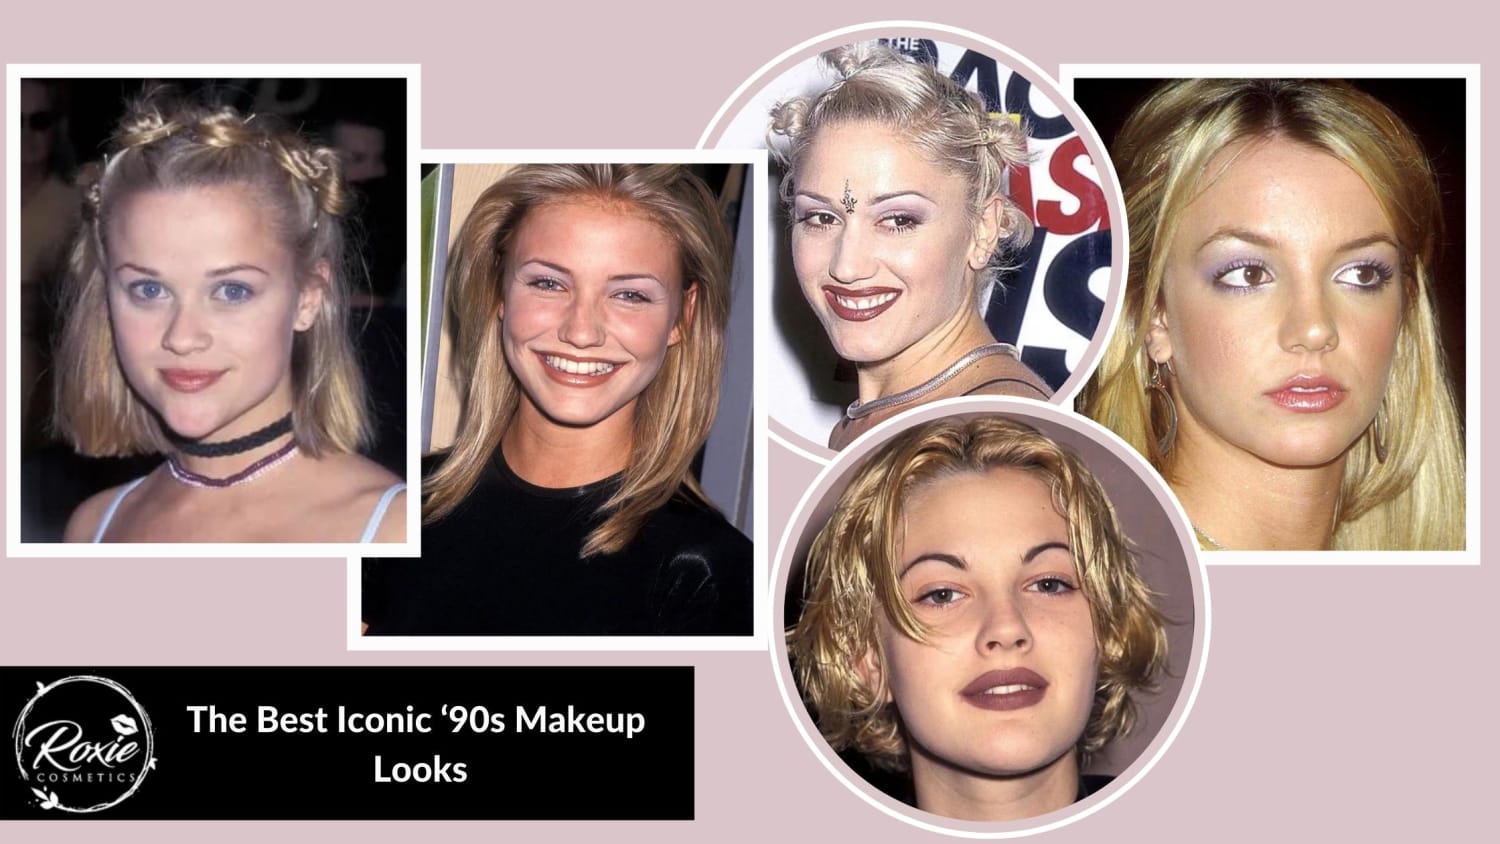 The Best Iconic ‘90s Makeup Looks